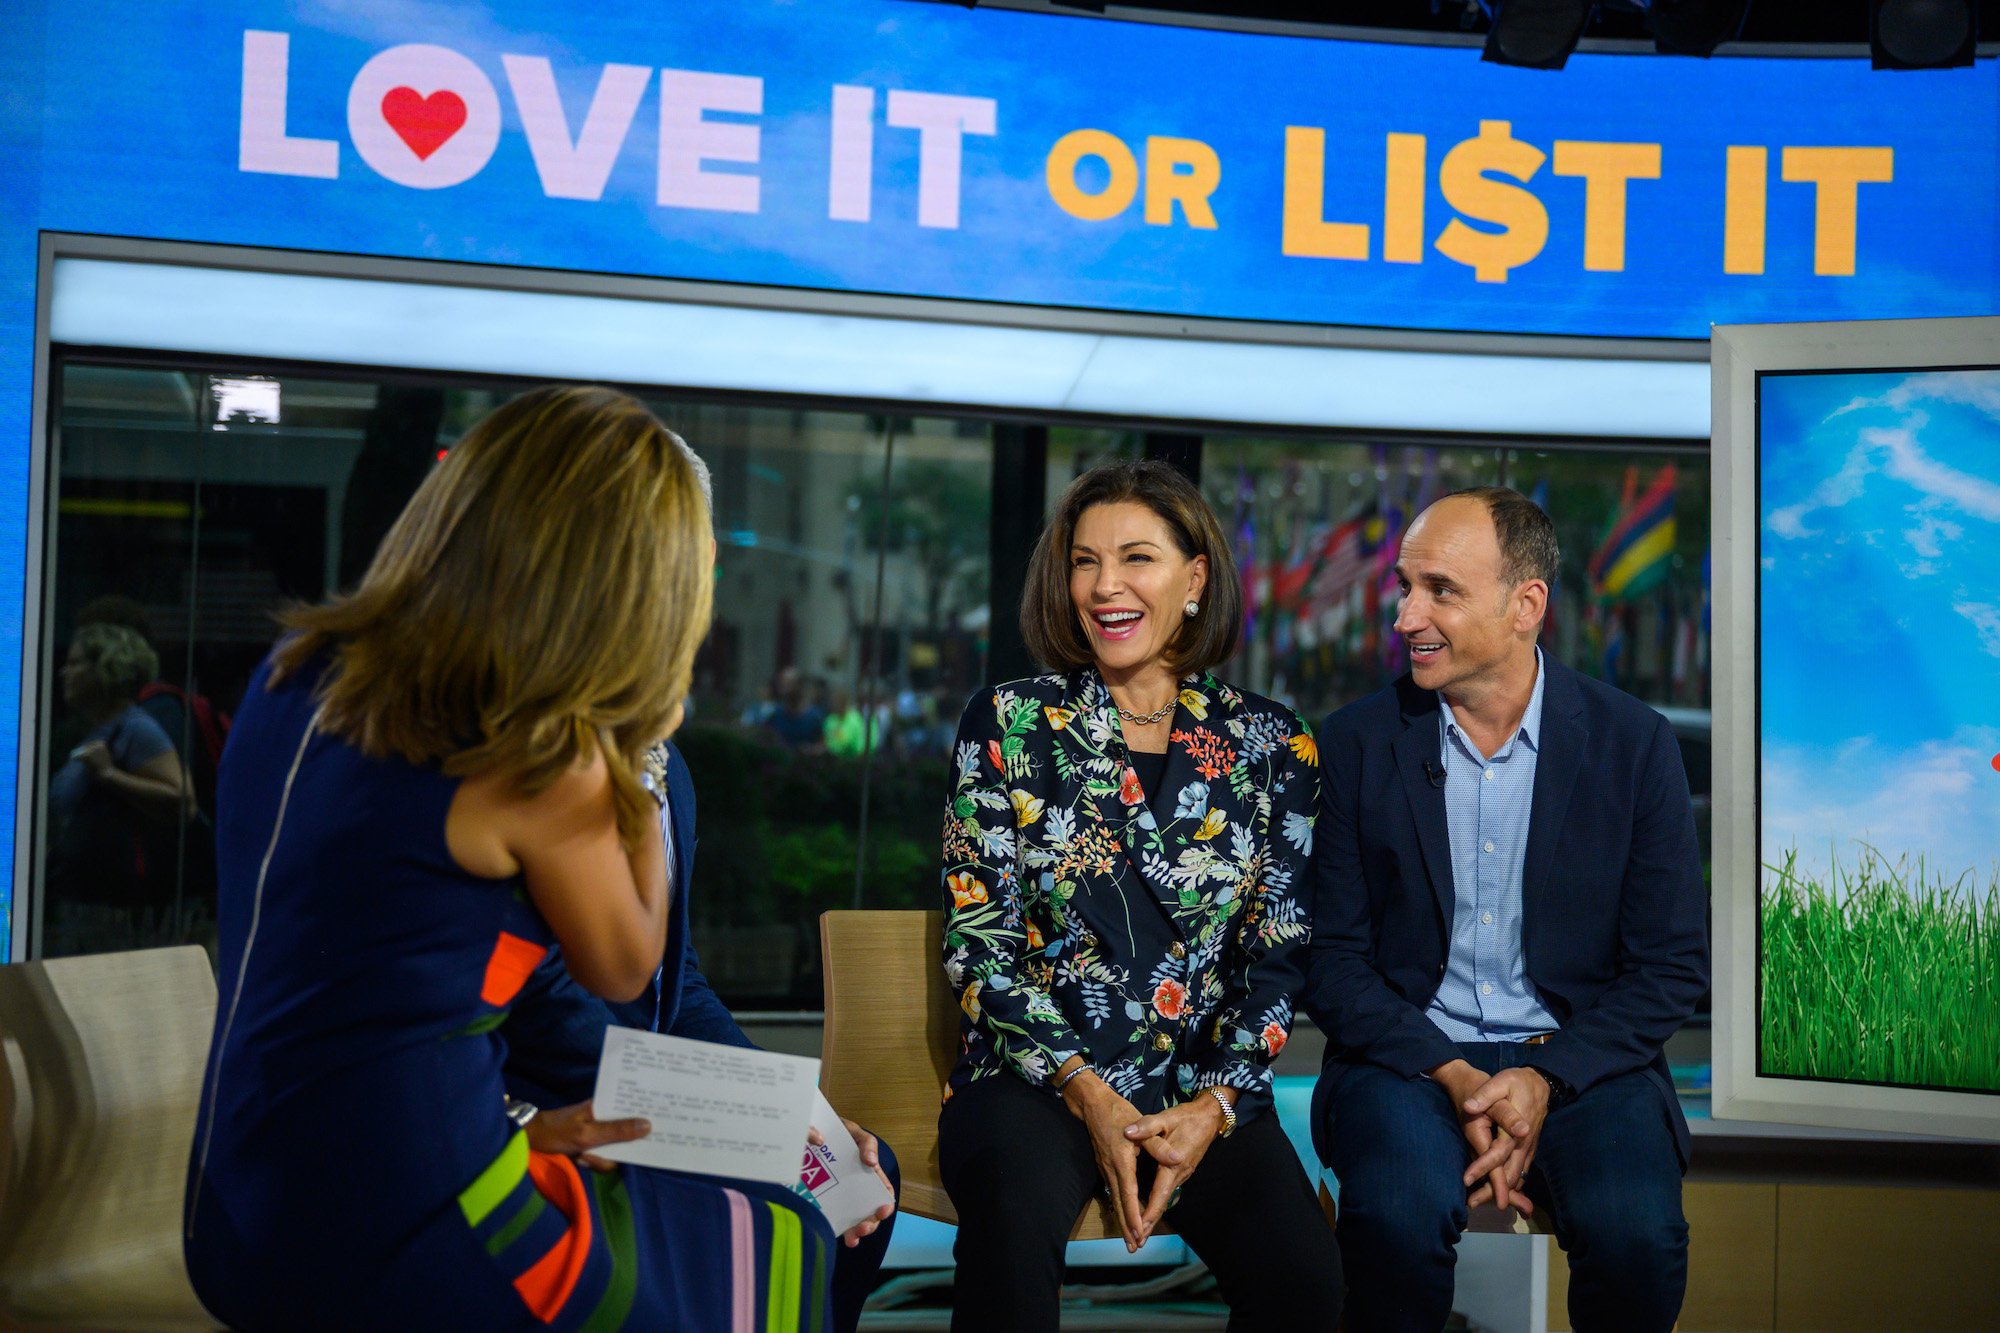 ‘Love It or List It’: Fans Hate How Mean the Couples Can Get